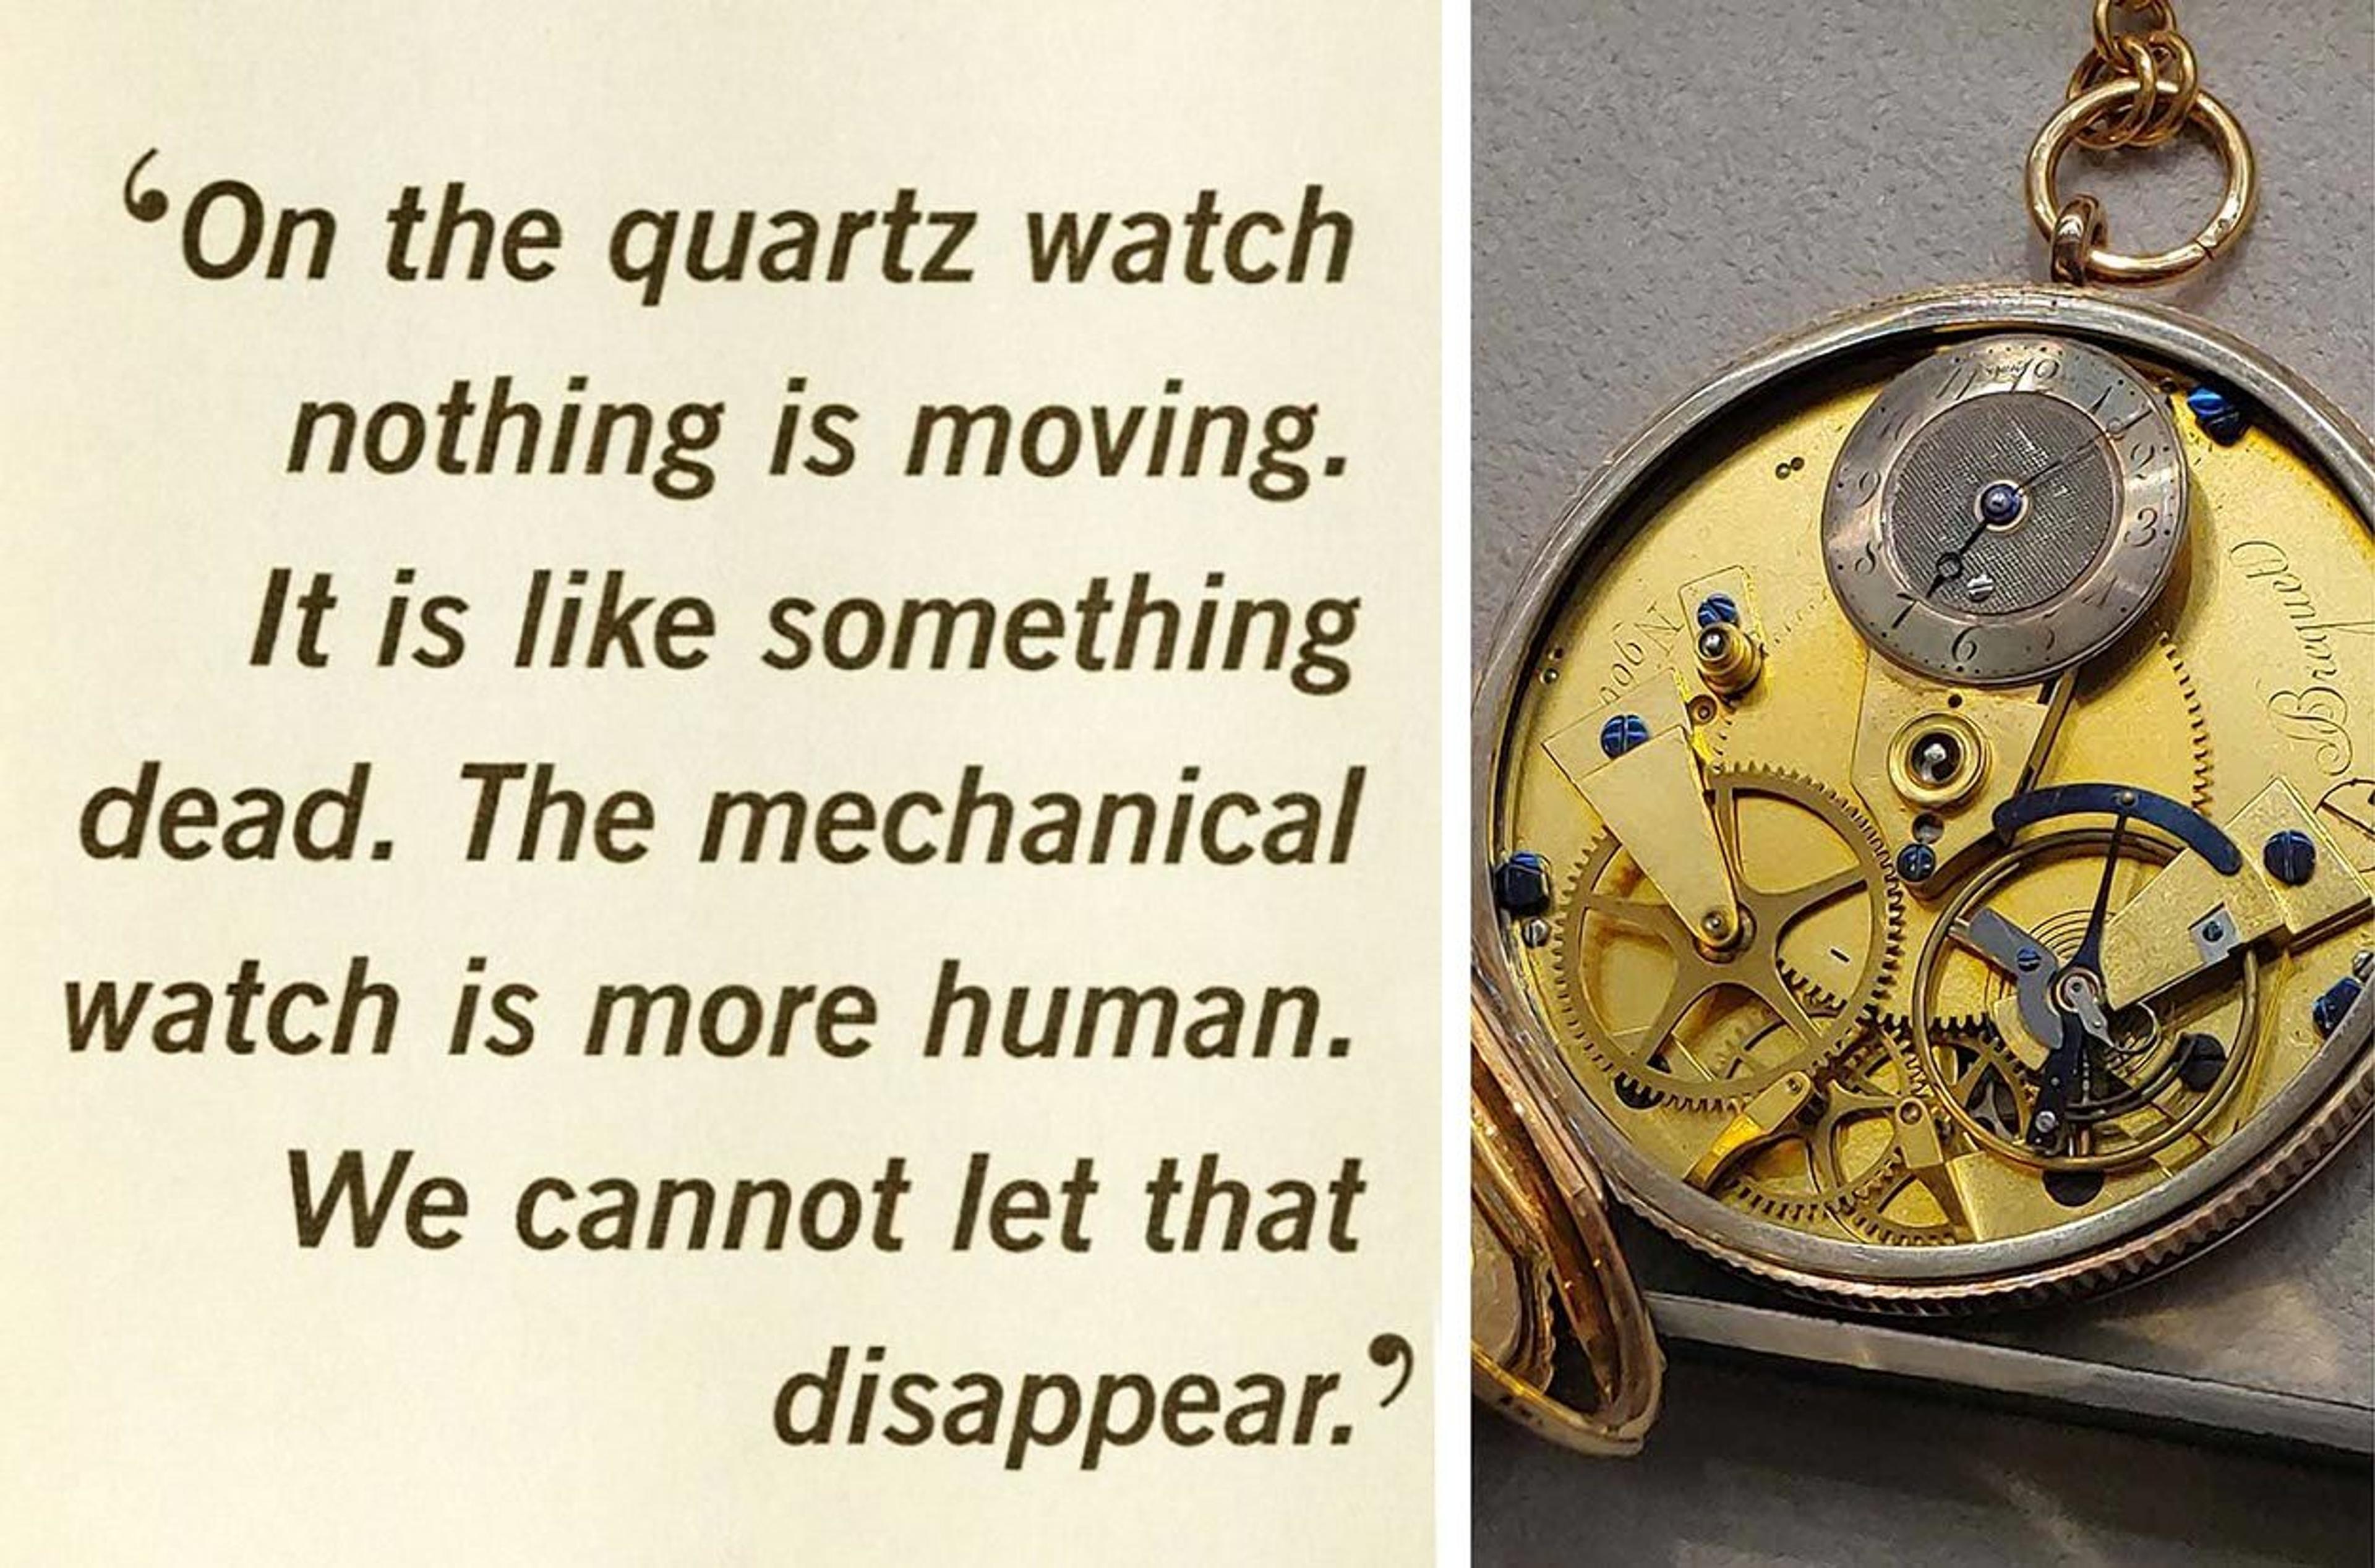 Quotation on left and mechanical pocket-watch on right